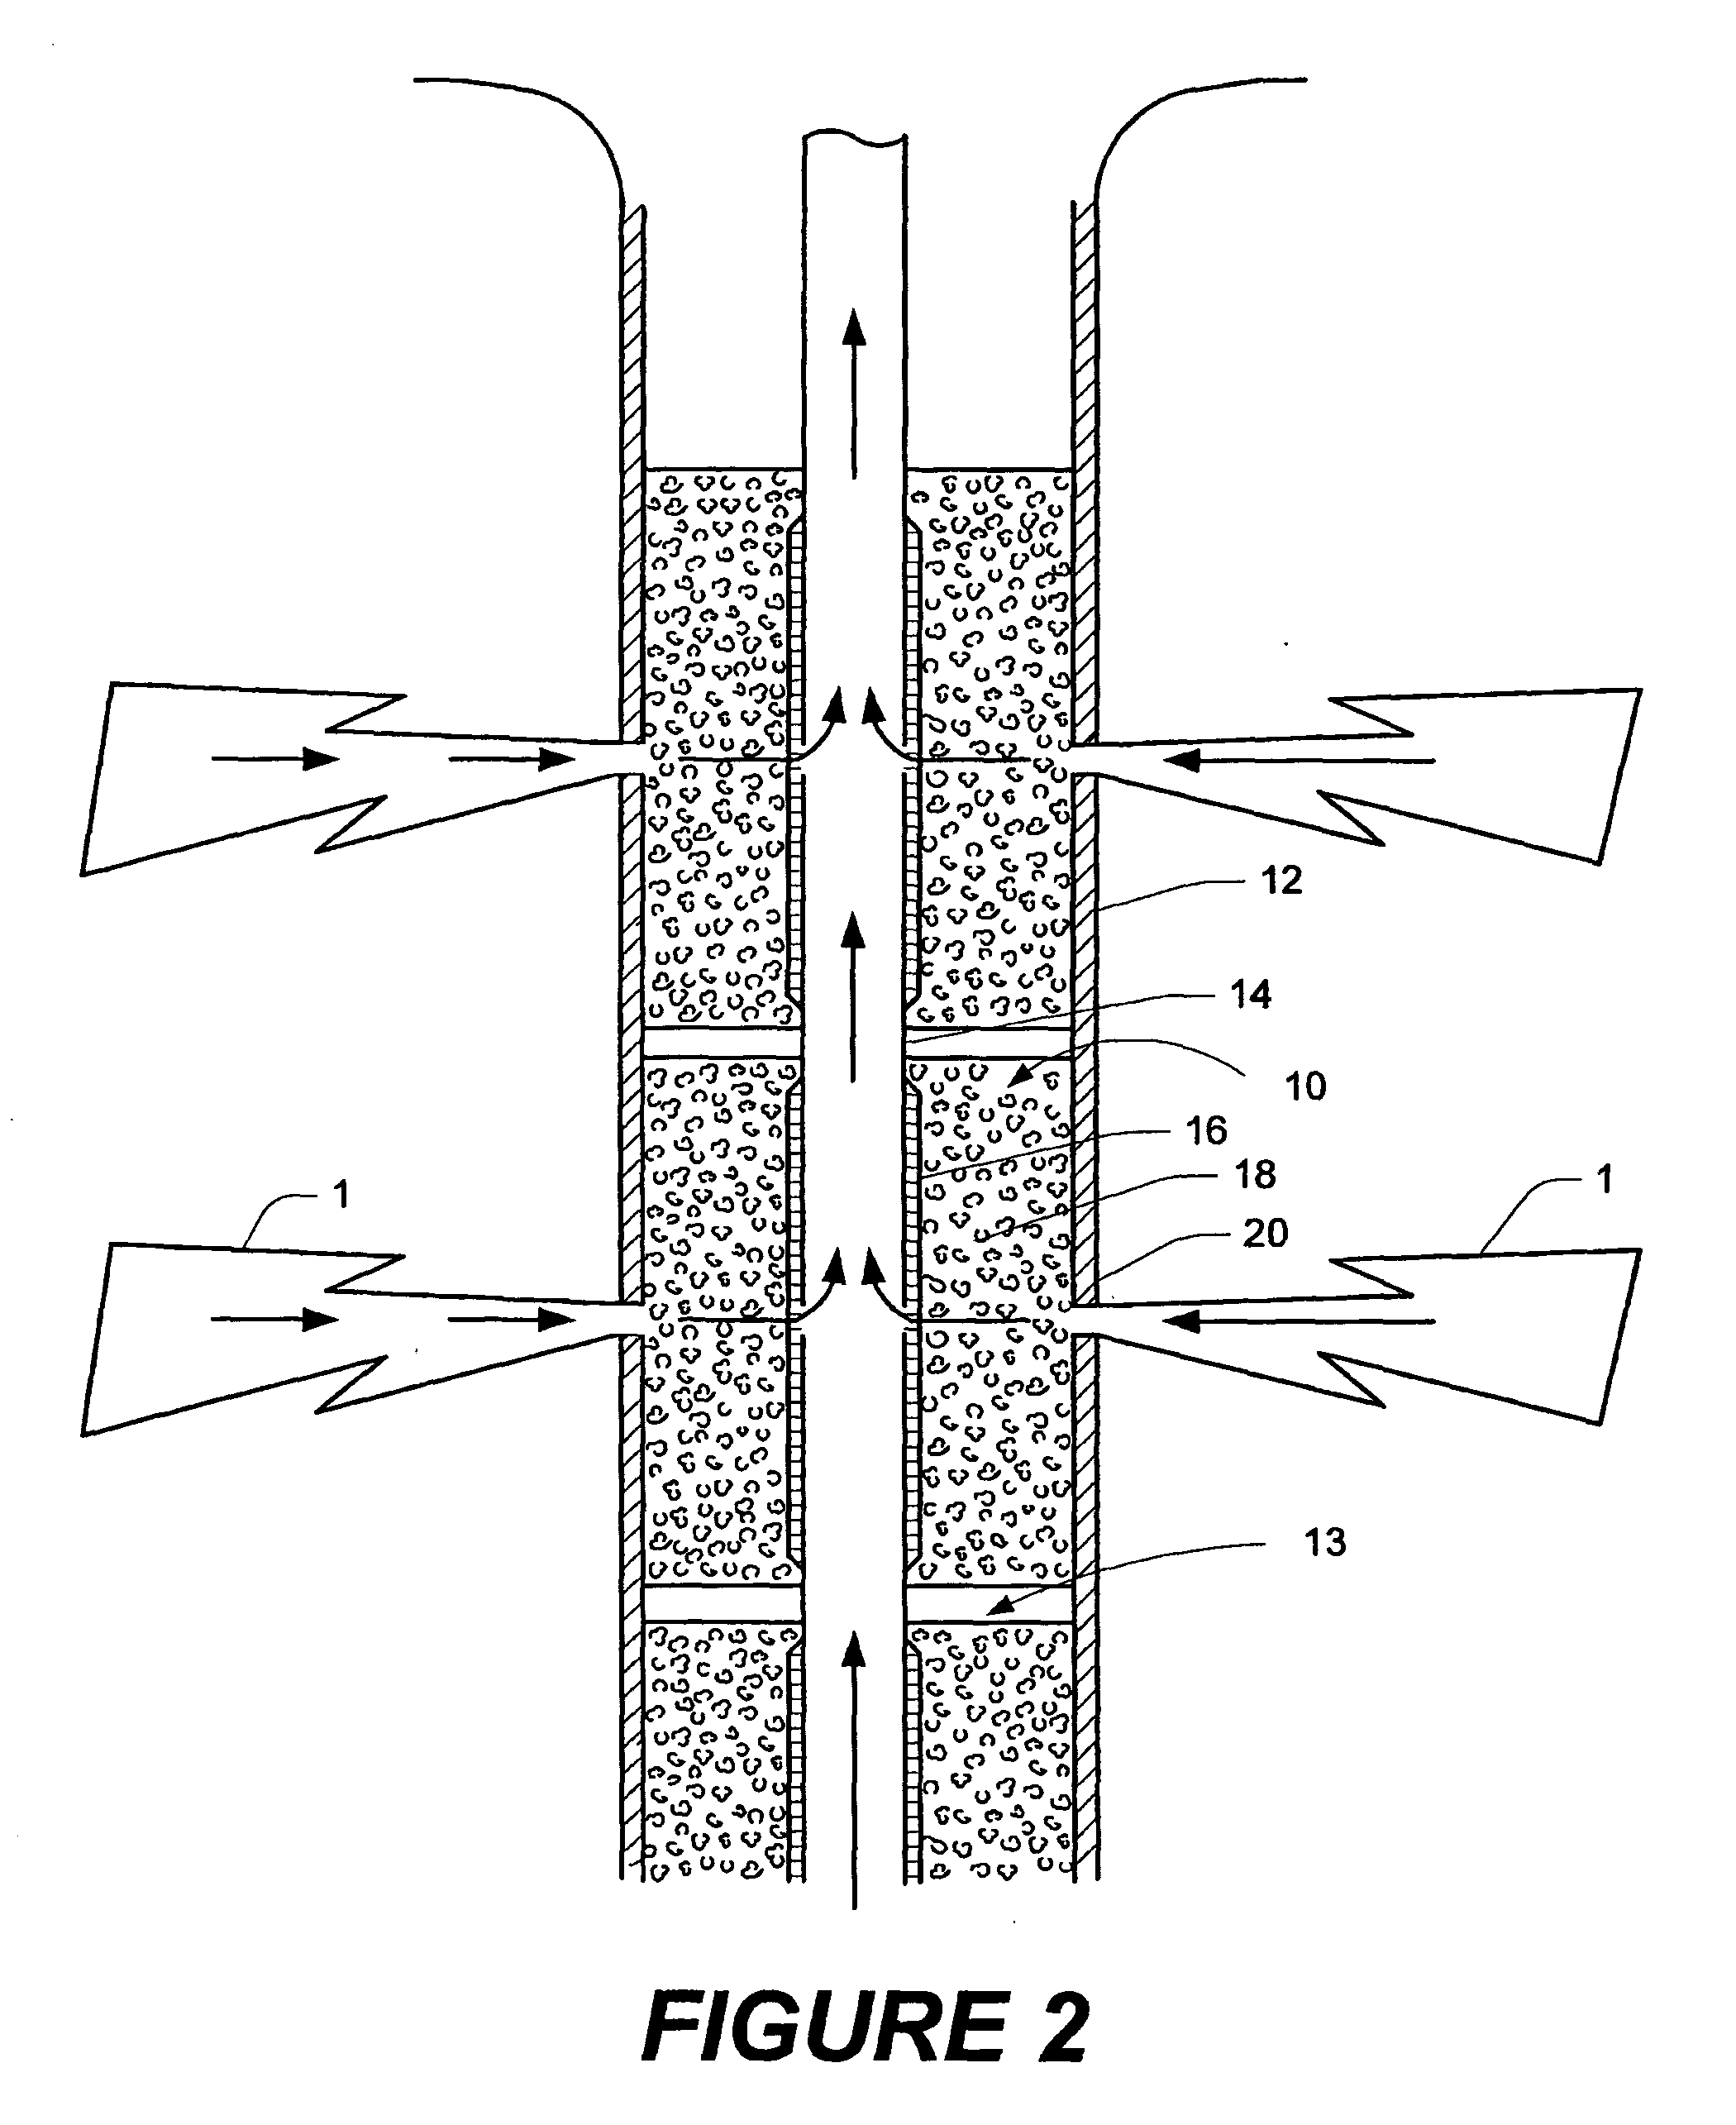 Method and apparatus for temporarily maintaining a downhole foam element in a compressed state